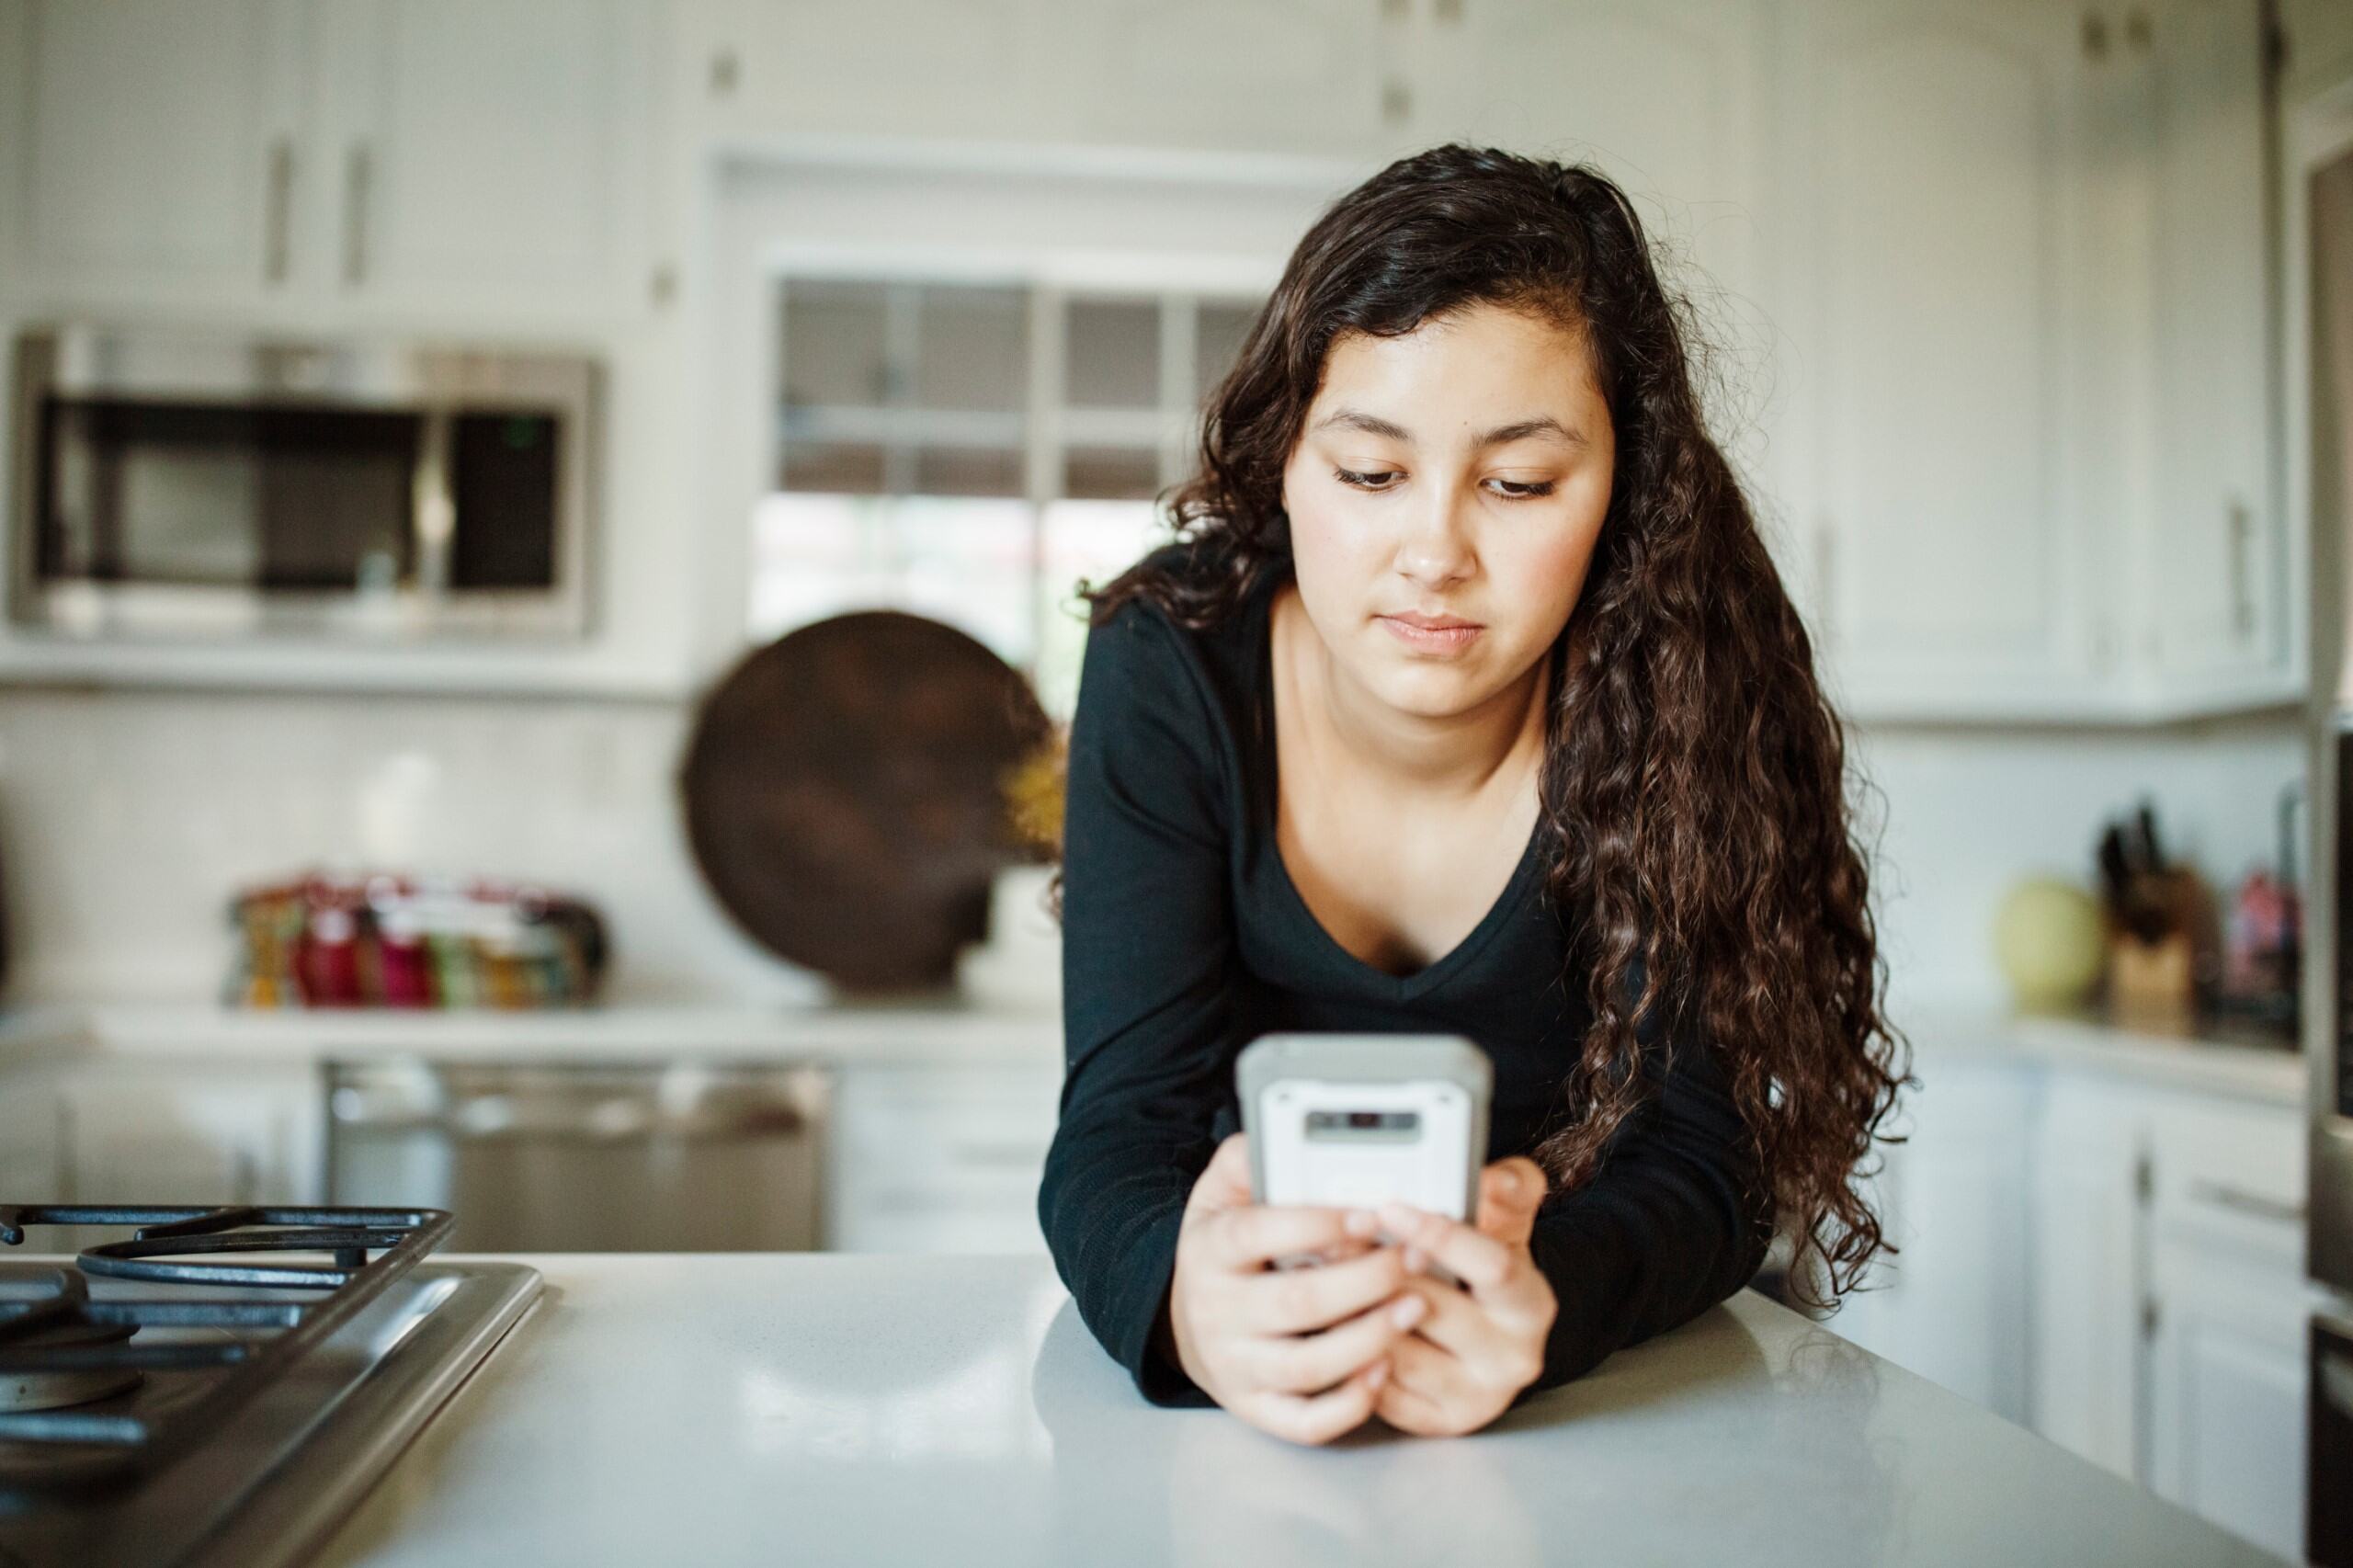 Front view of Hispanic girl, aged around 15, leaning on kitchen counter holding and looking at smart phone.